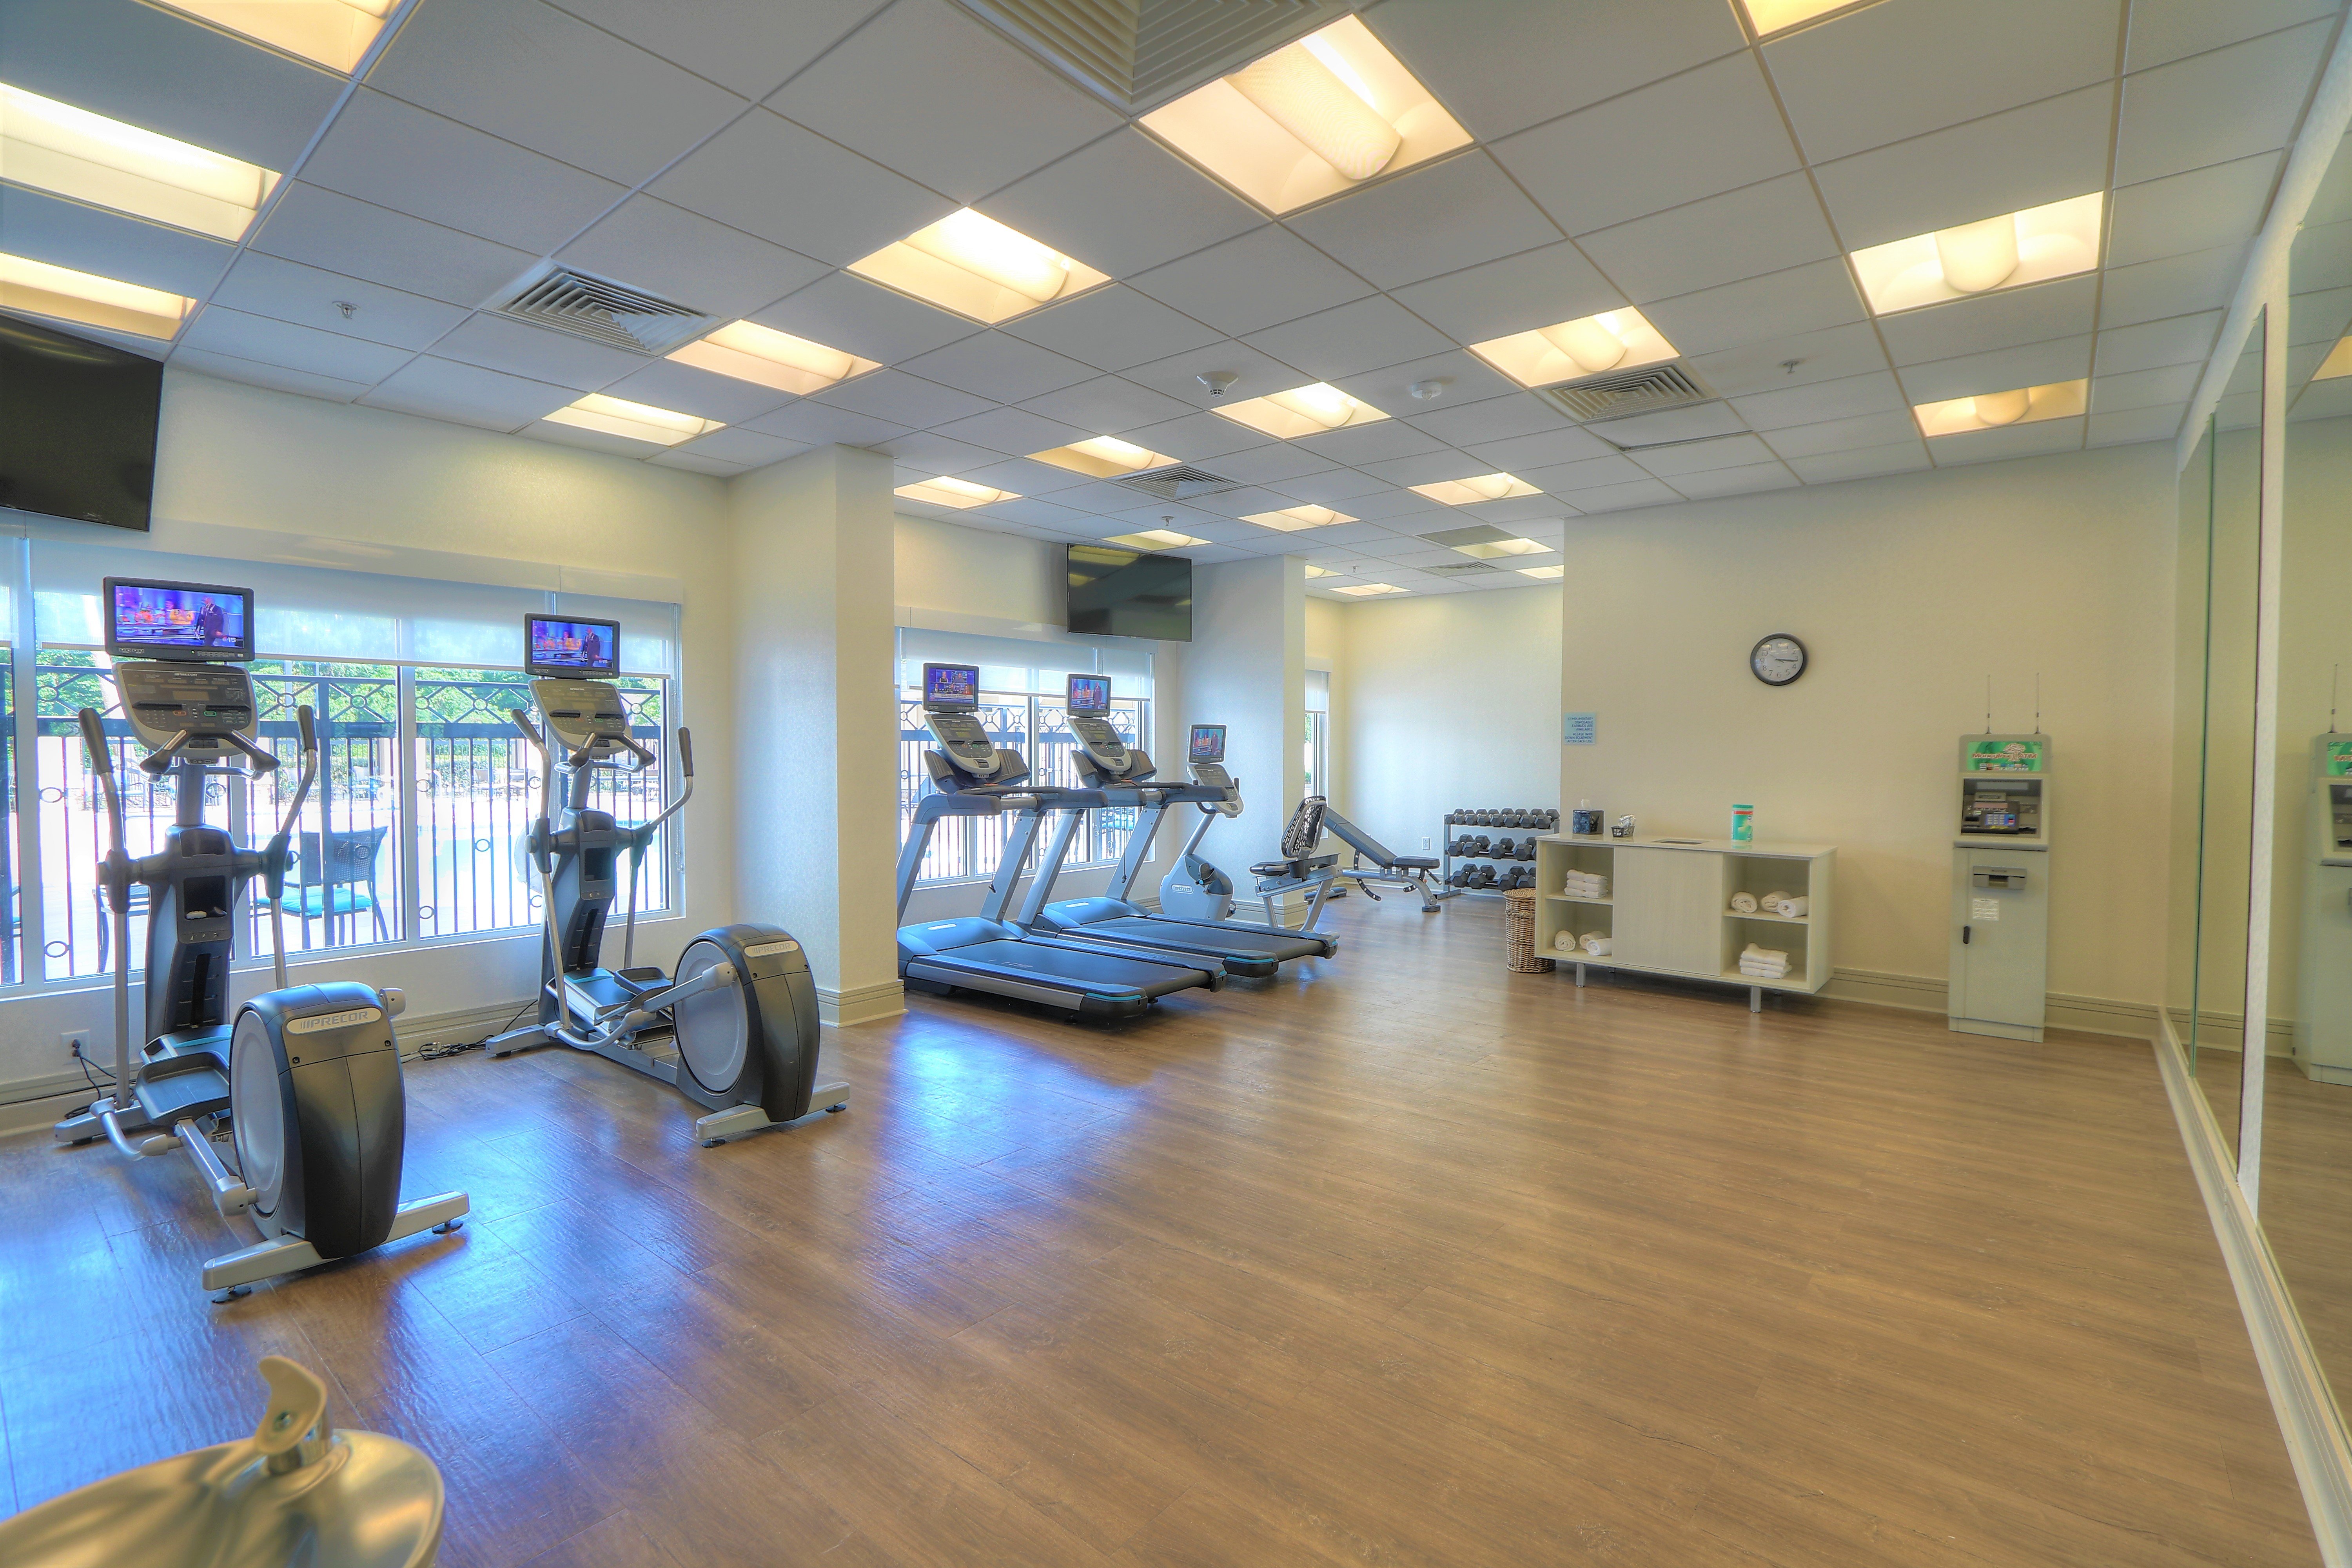 The Holiday Inn Express and Suites Saraland 24 Hour Fitness Center